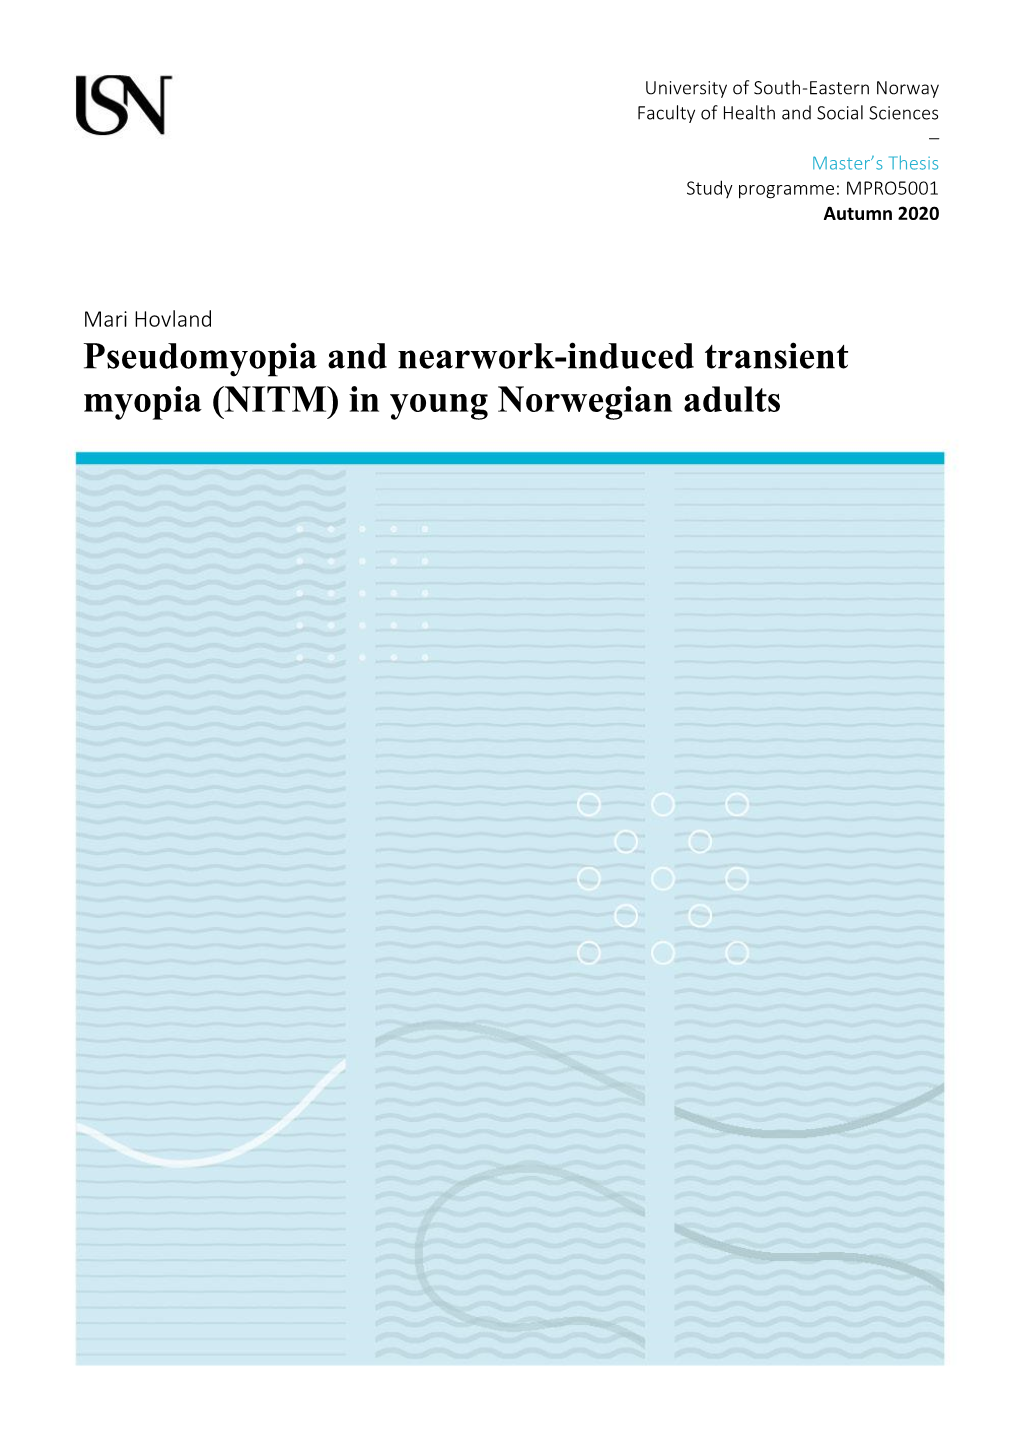 Pseudomyopia and Nearwork-Induced Transient Myopia (NITM) in Young Norwegian Adults